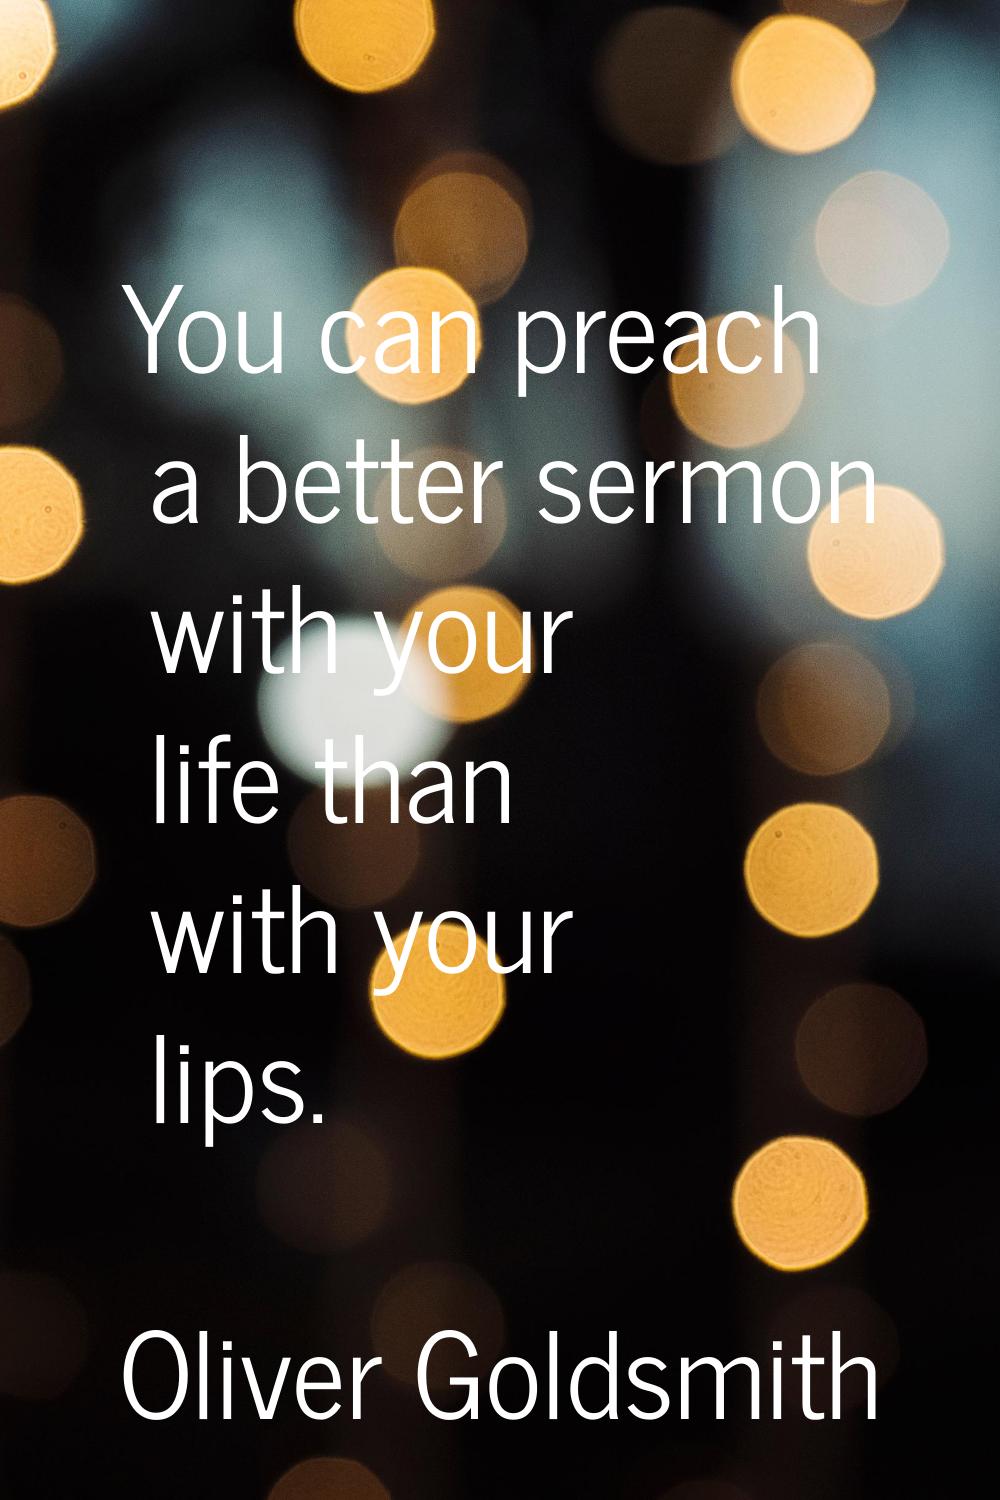 You can preach a better sermon with your life than with your lips.